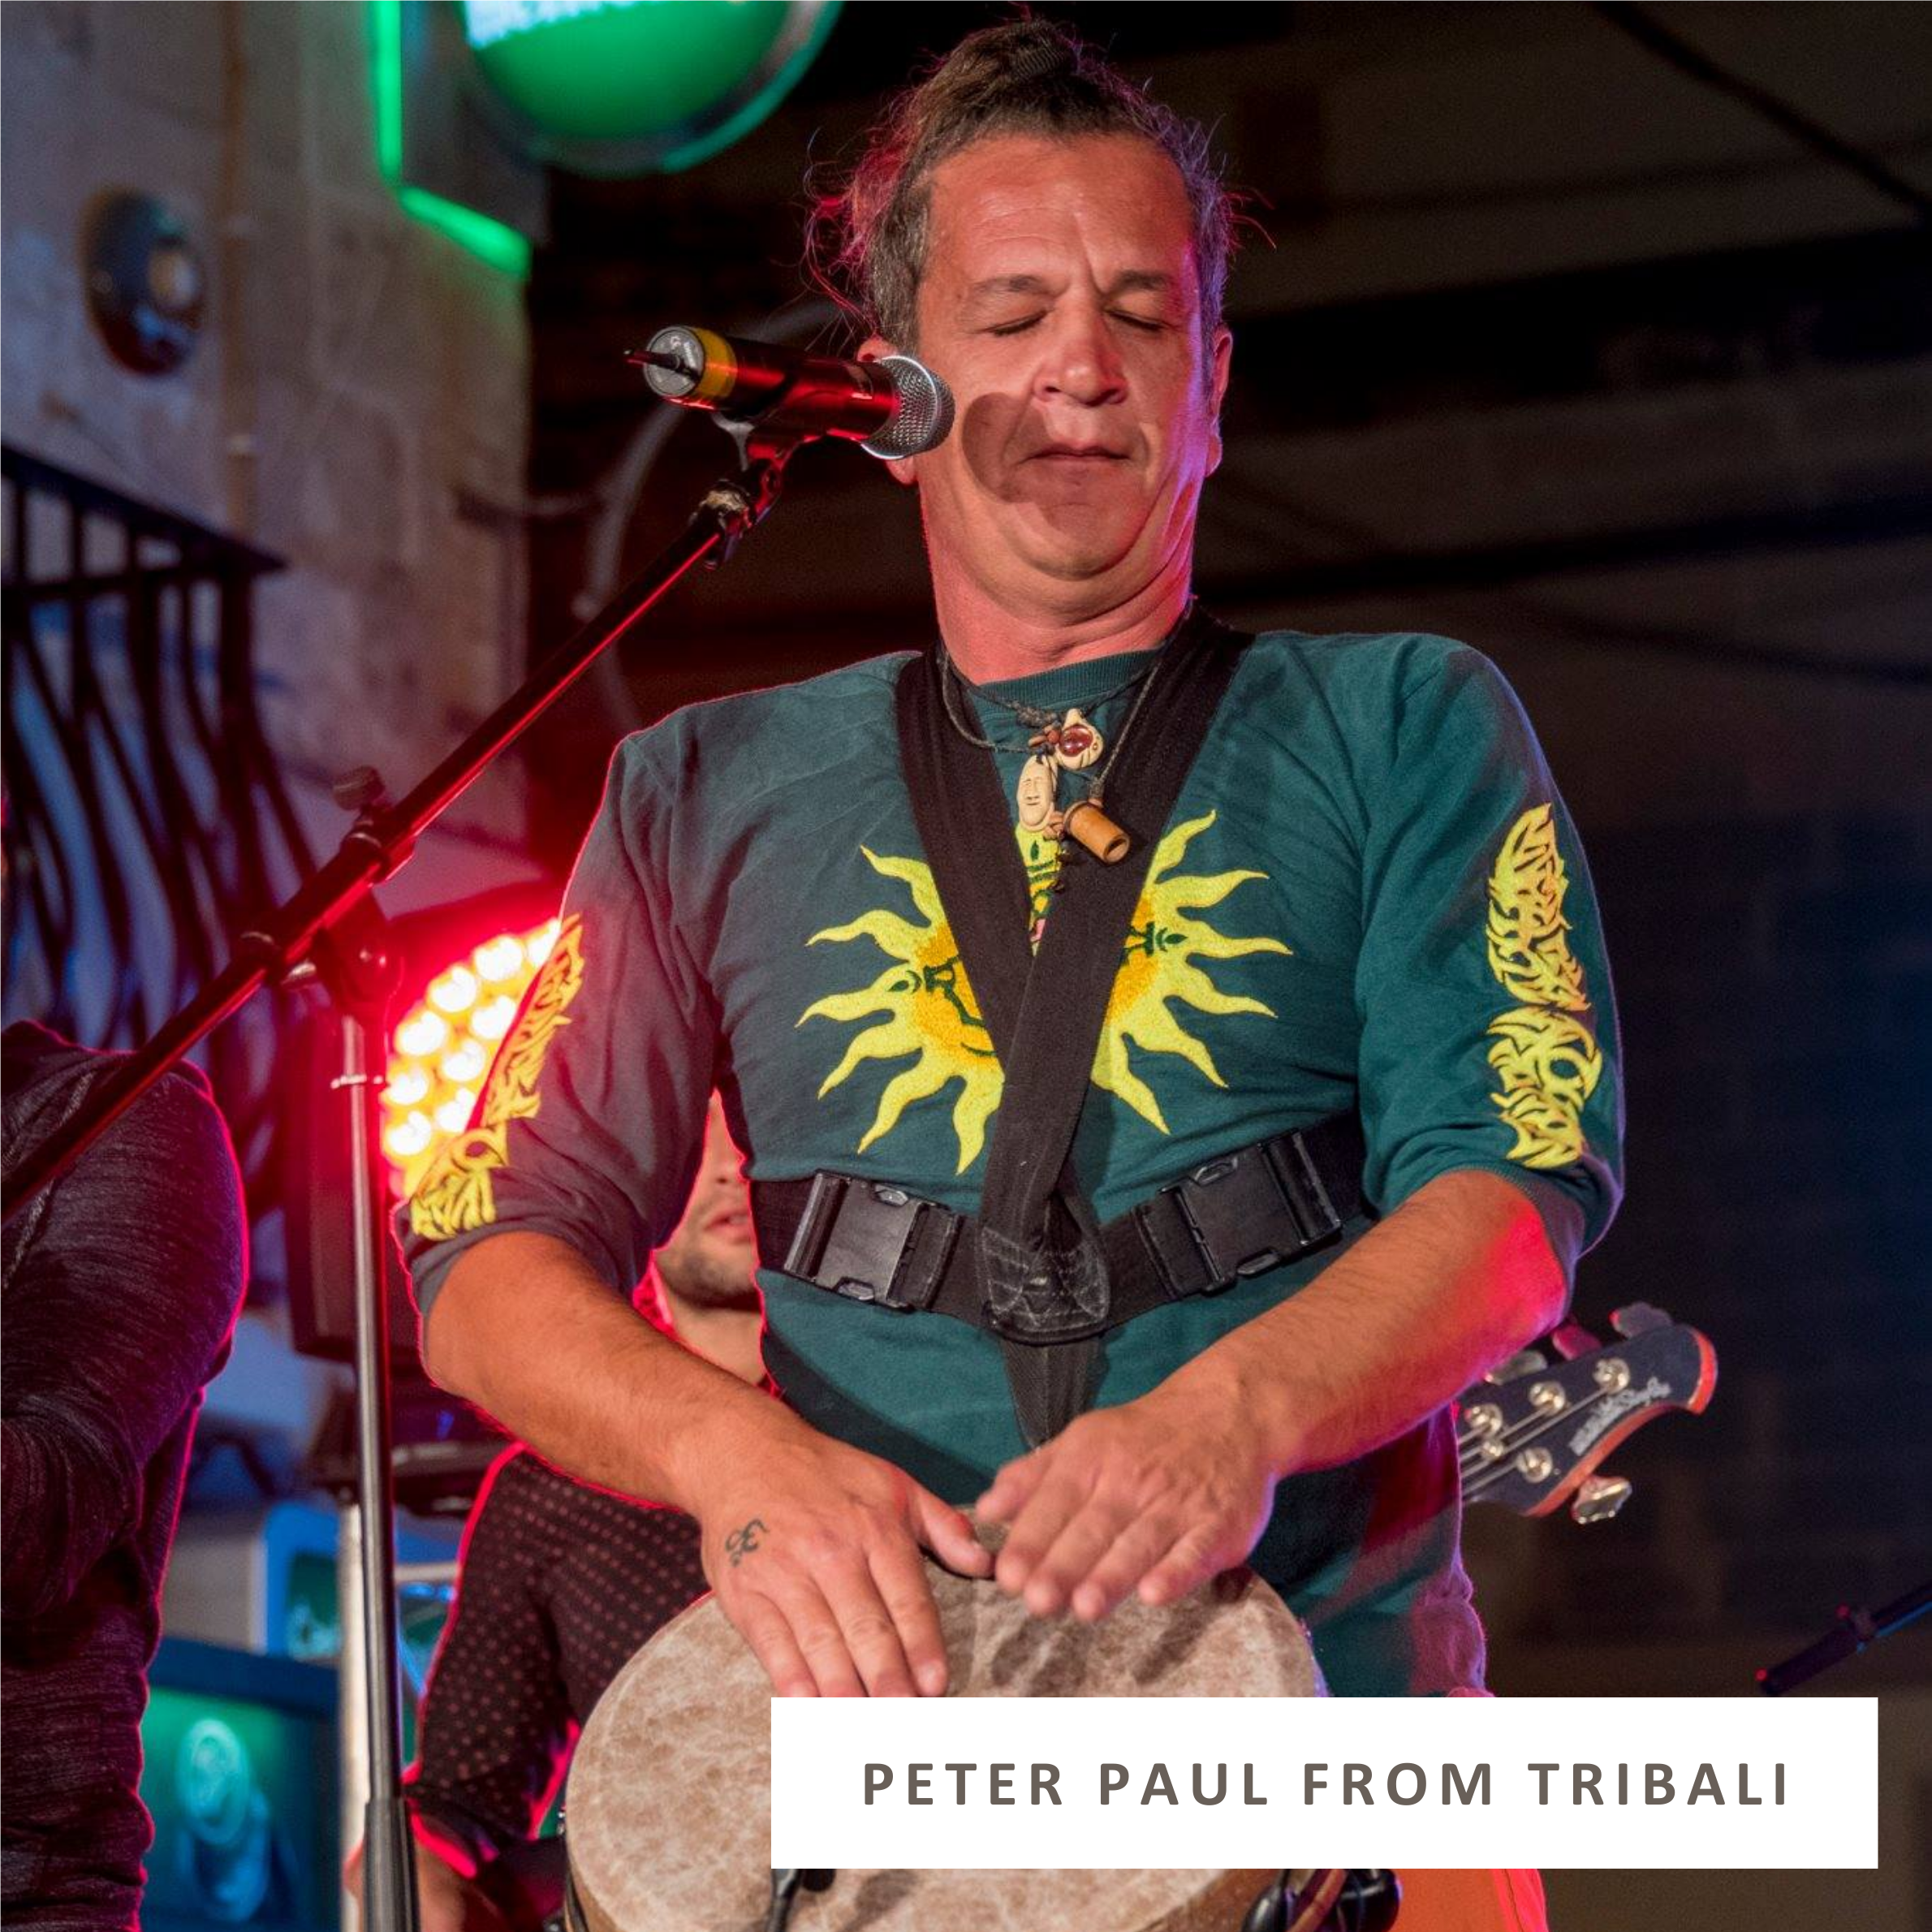 Peter Paul from Tribali